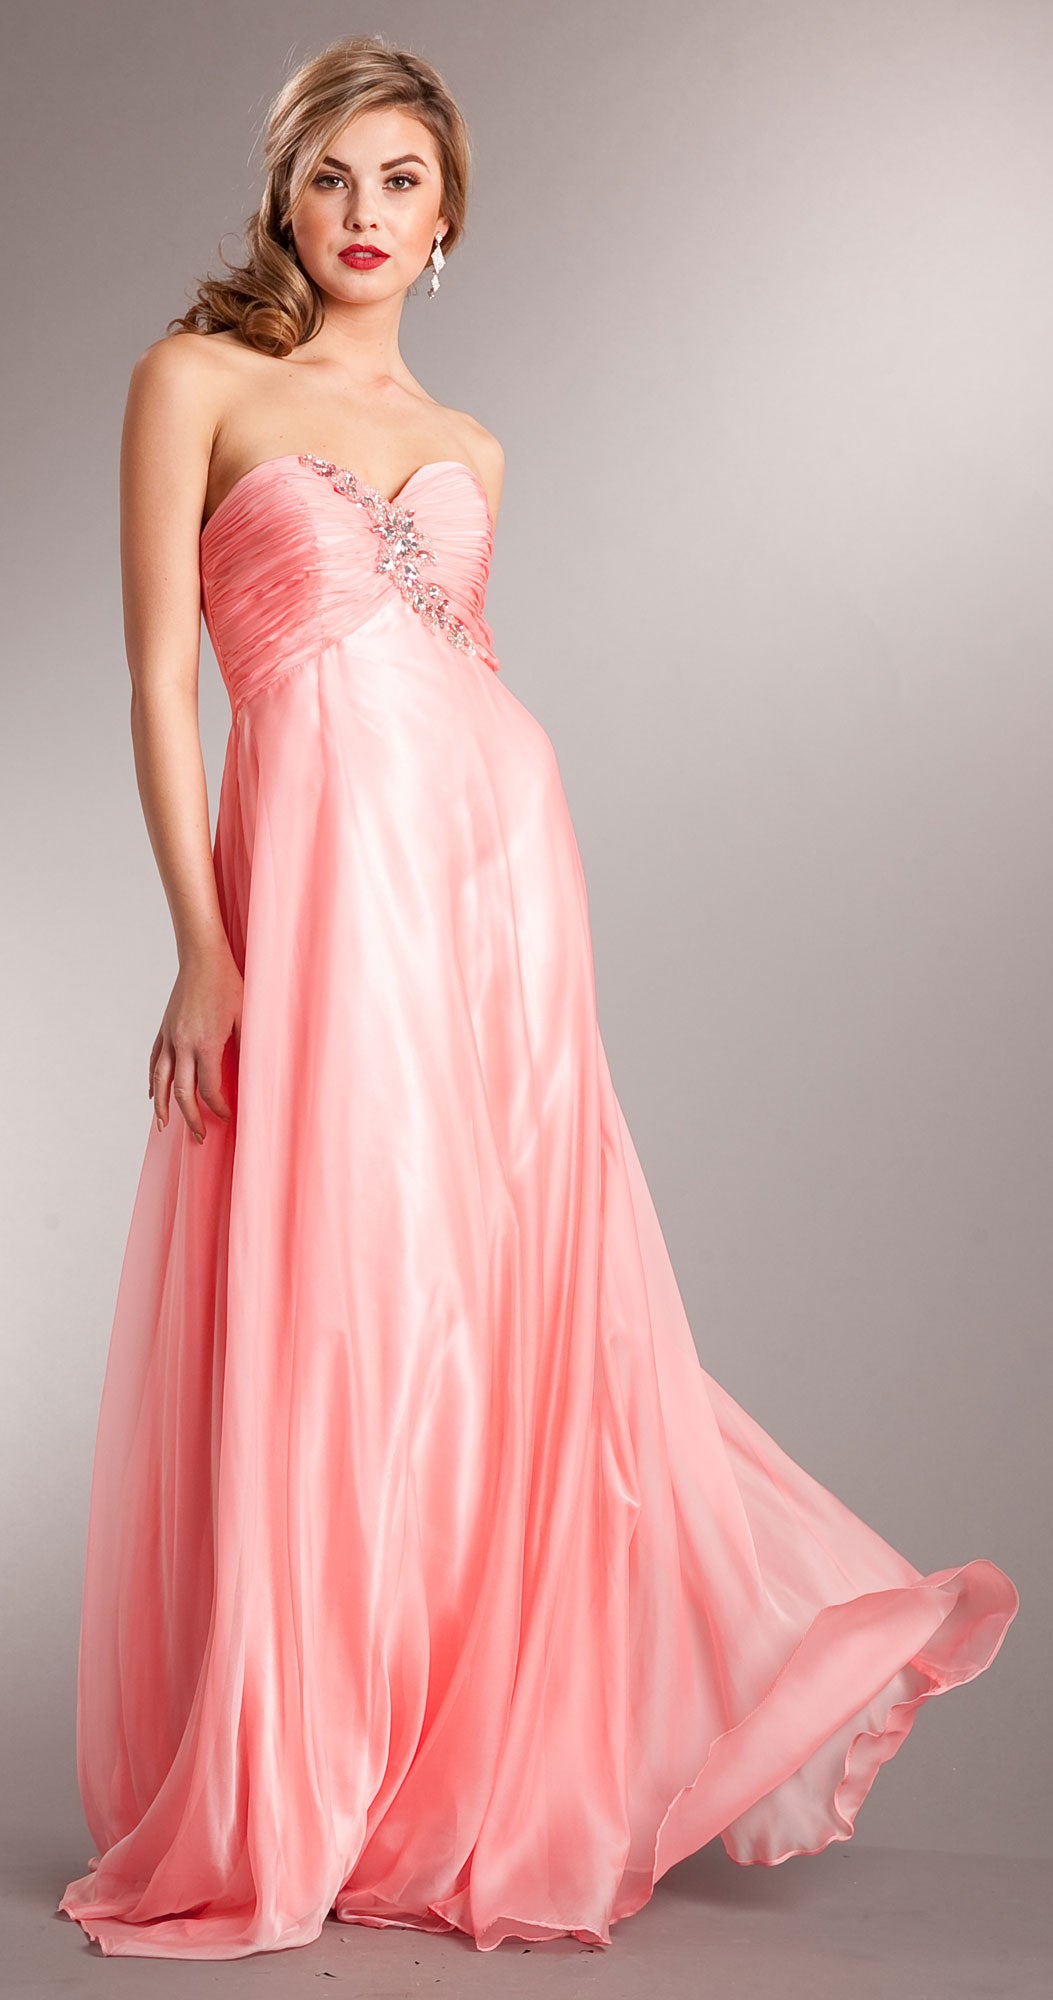 Main image of Strapless Shirred Long Formal Prom Dress With Rhinestones